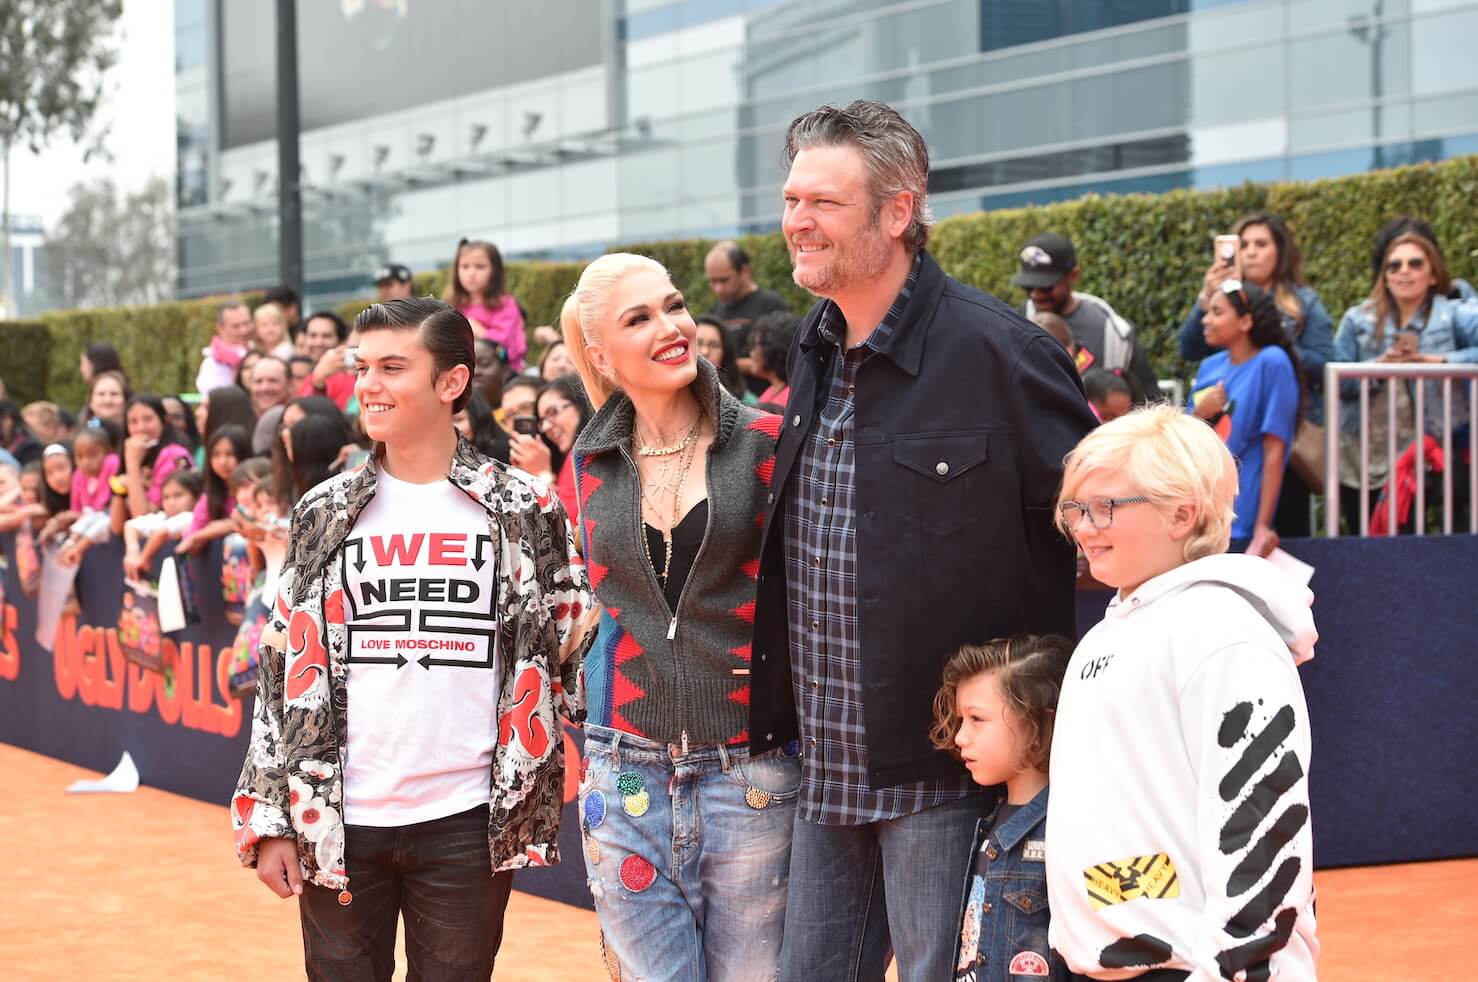 Gwen Stefani, Blake Shelton, and Stefani's three kids standing together for a photo and smiling at a movie premiere in 2019